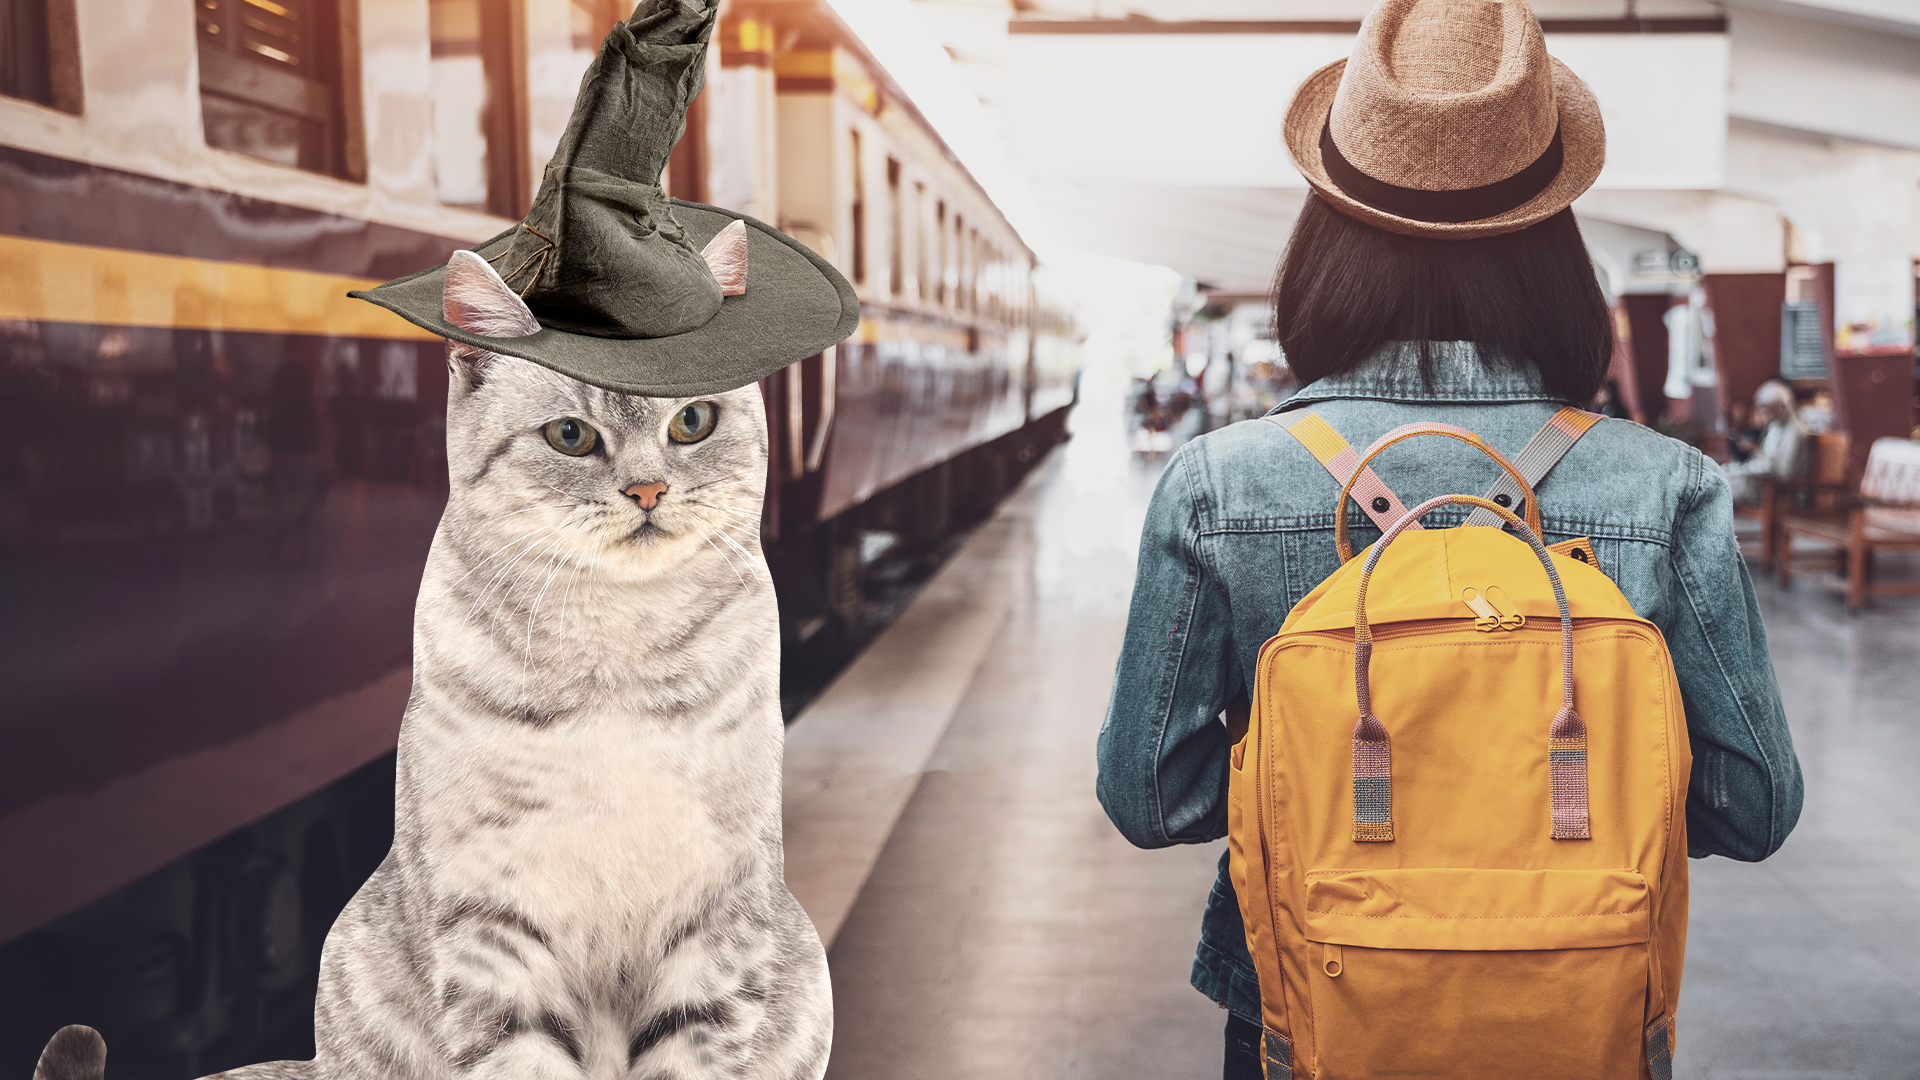 Girl in train station with McGonagall cat